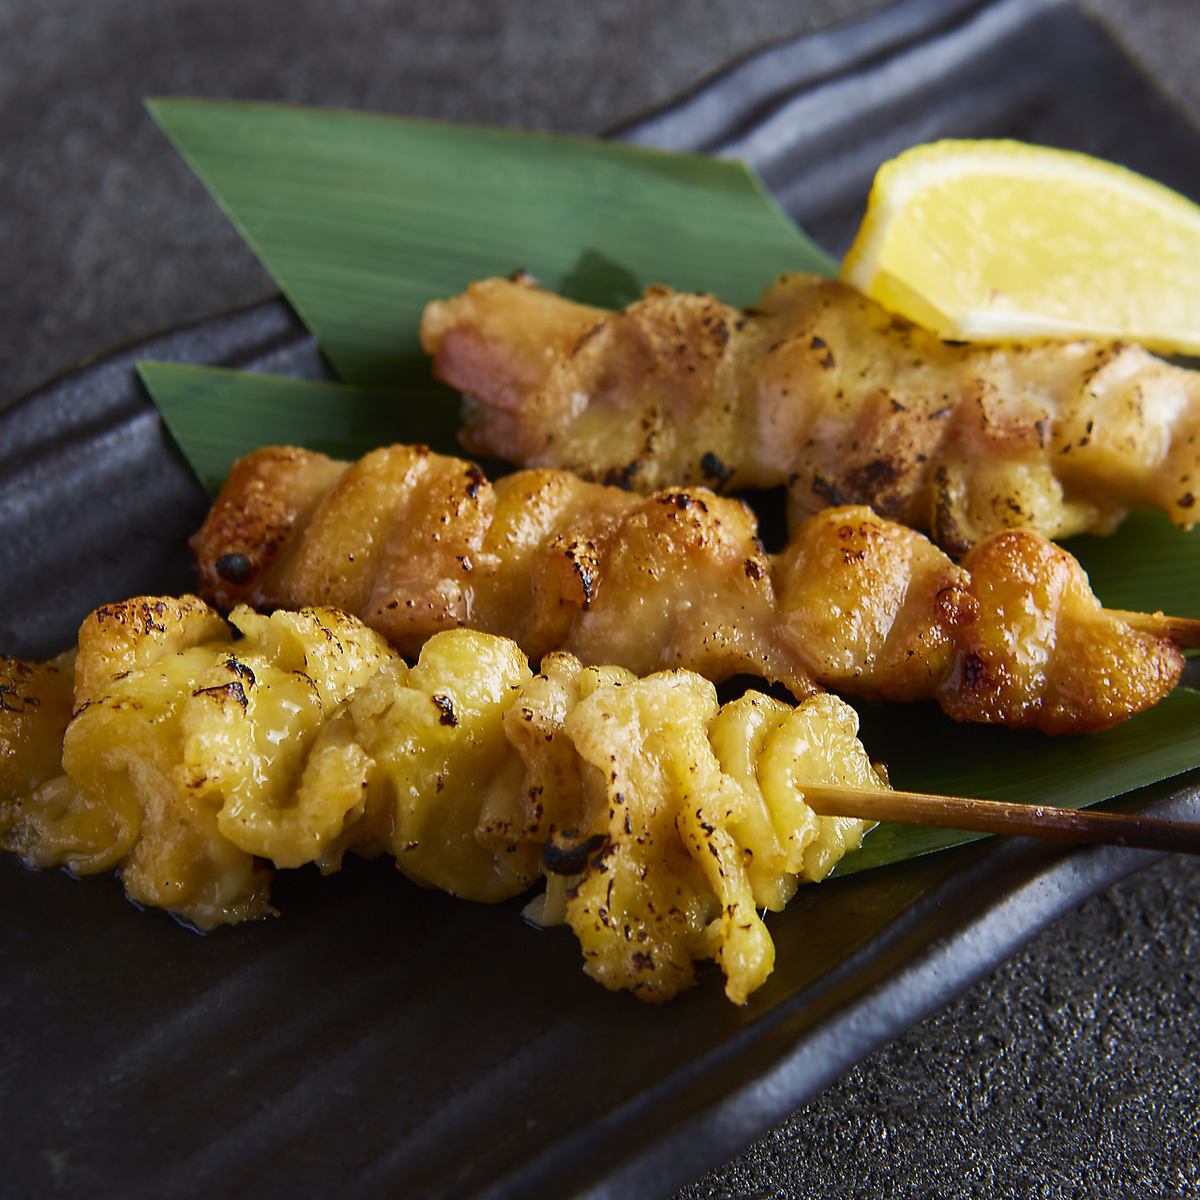 We offer a wide variety of skewers, from yakitori to unique dishes.